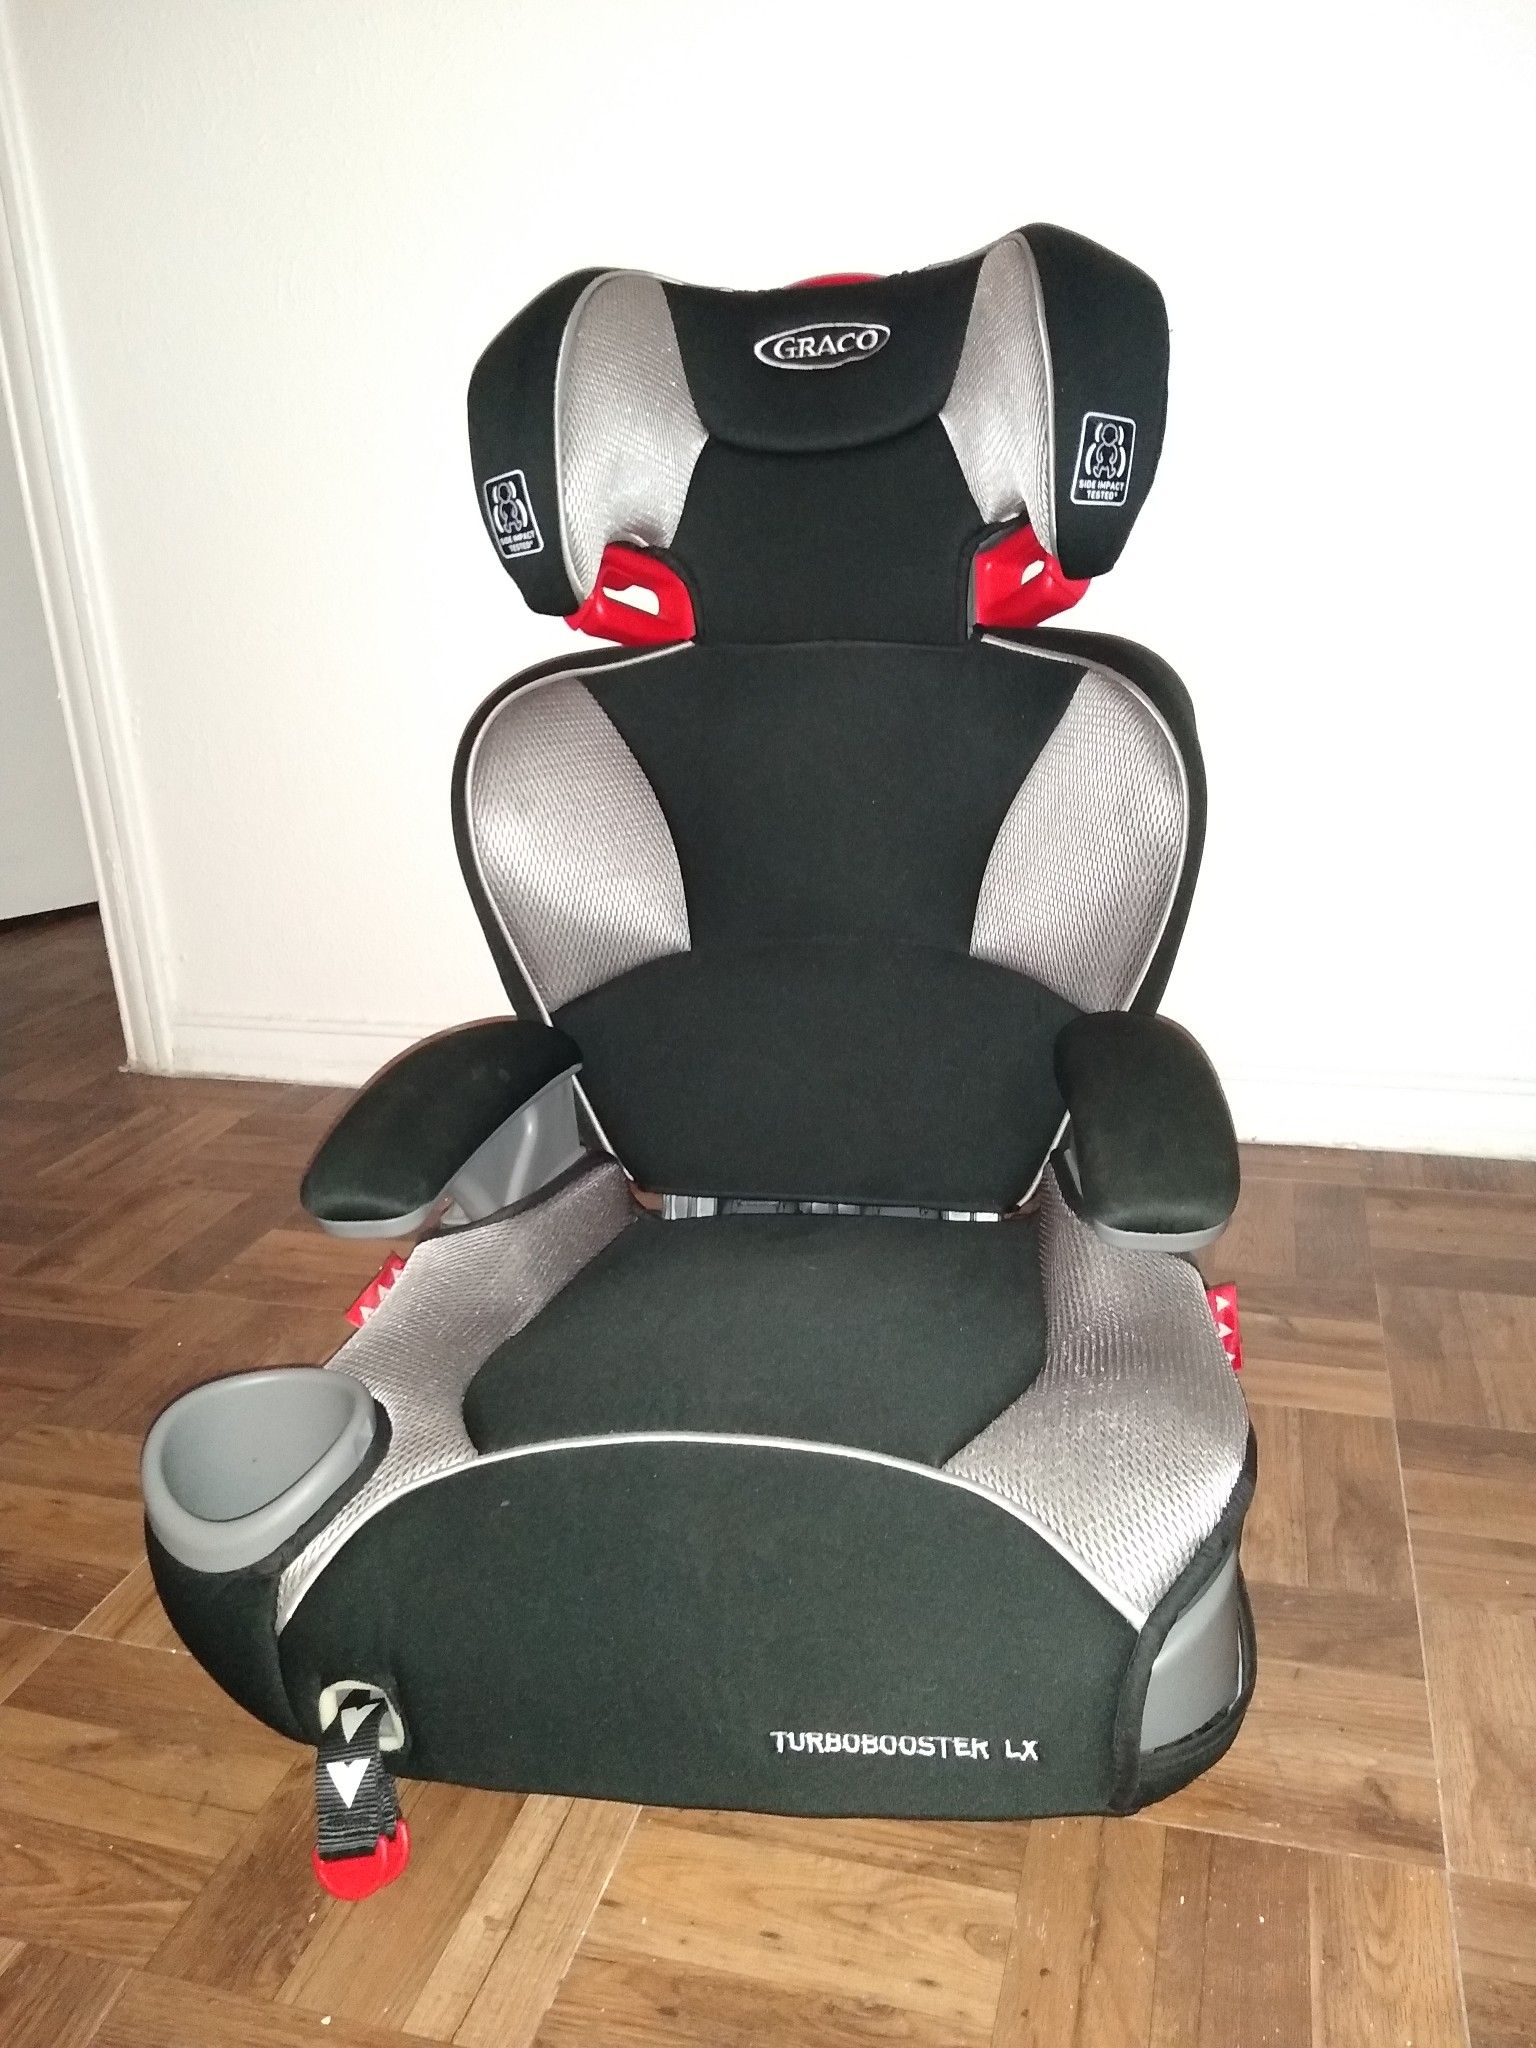 Booster car seat (Graco)